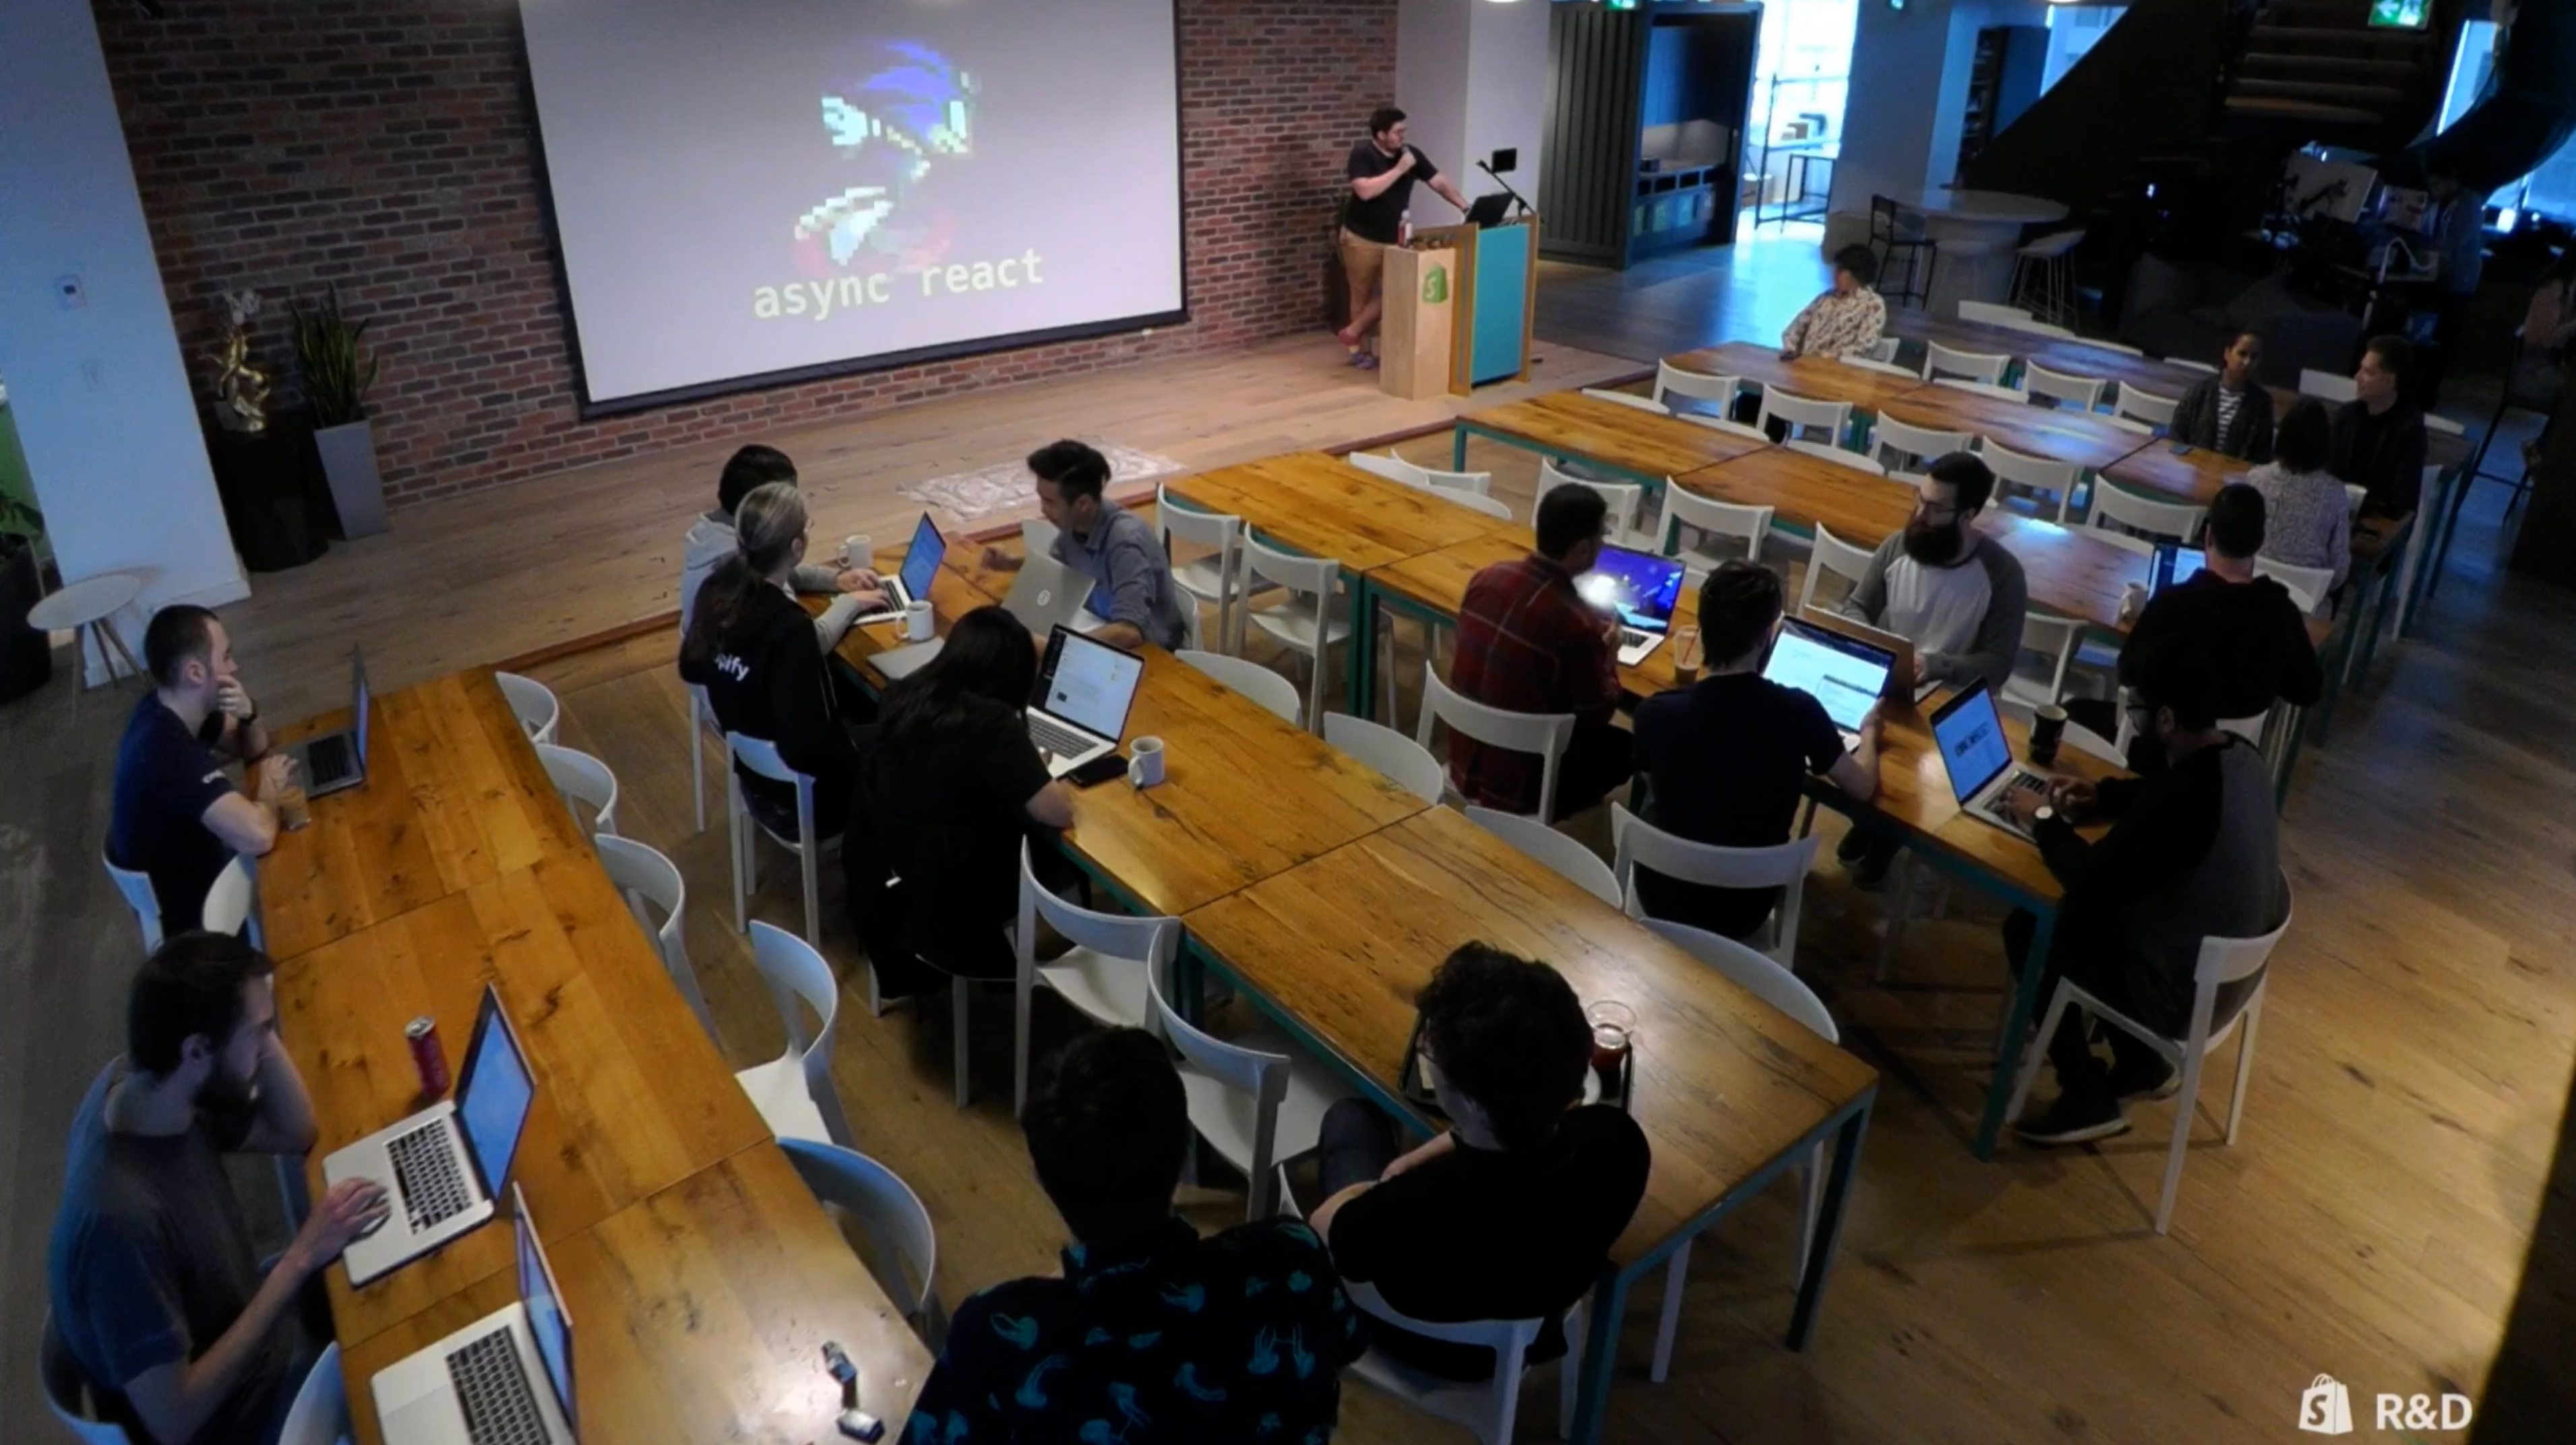 A picture of Shopify employees gathering in the lunch room of the Ottawa Office for Dev Talks.  There are 5 long tables with several people sitting down. The tables are placed in front of a stage with a screen. On that screen is an image of Crash Bandicoot. There is a person standing at a lectern on the stage presenting.